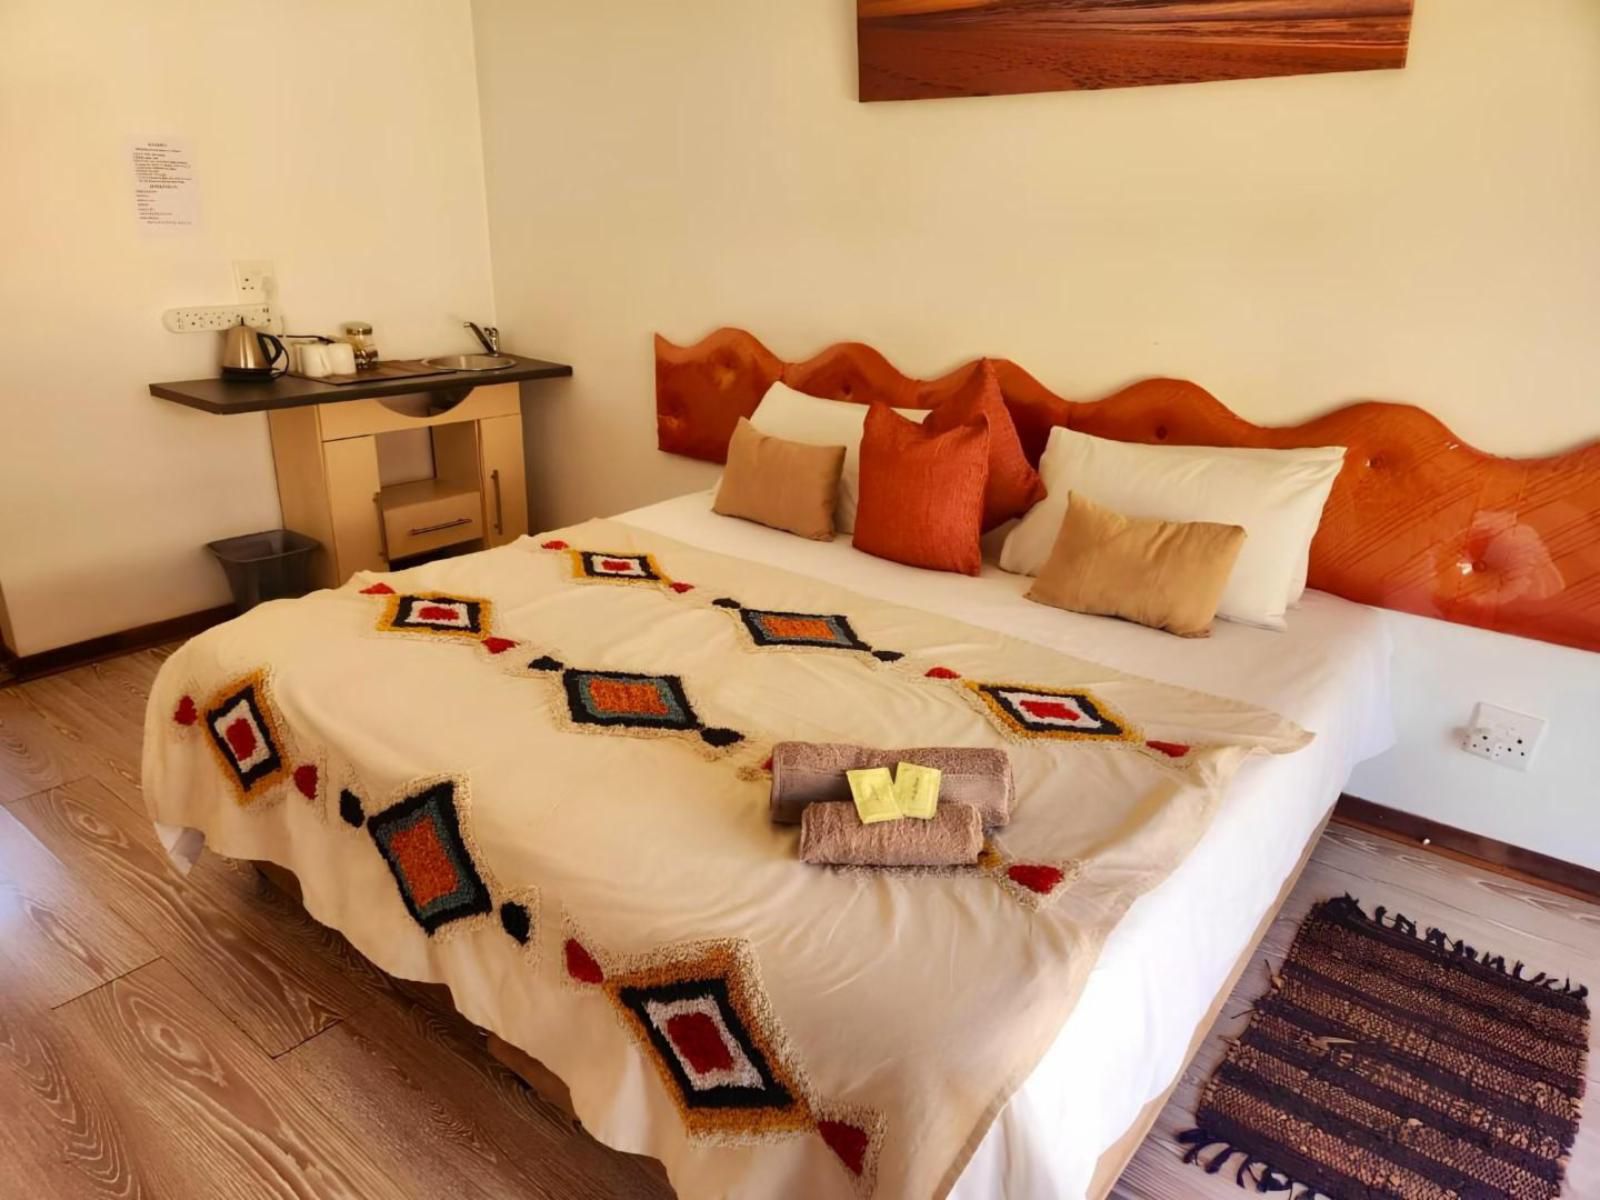 Villa Mexicana Guesthouse Ernestville Kimberley Northern Cape South Africa Colorful, Bedroom